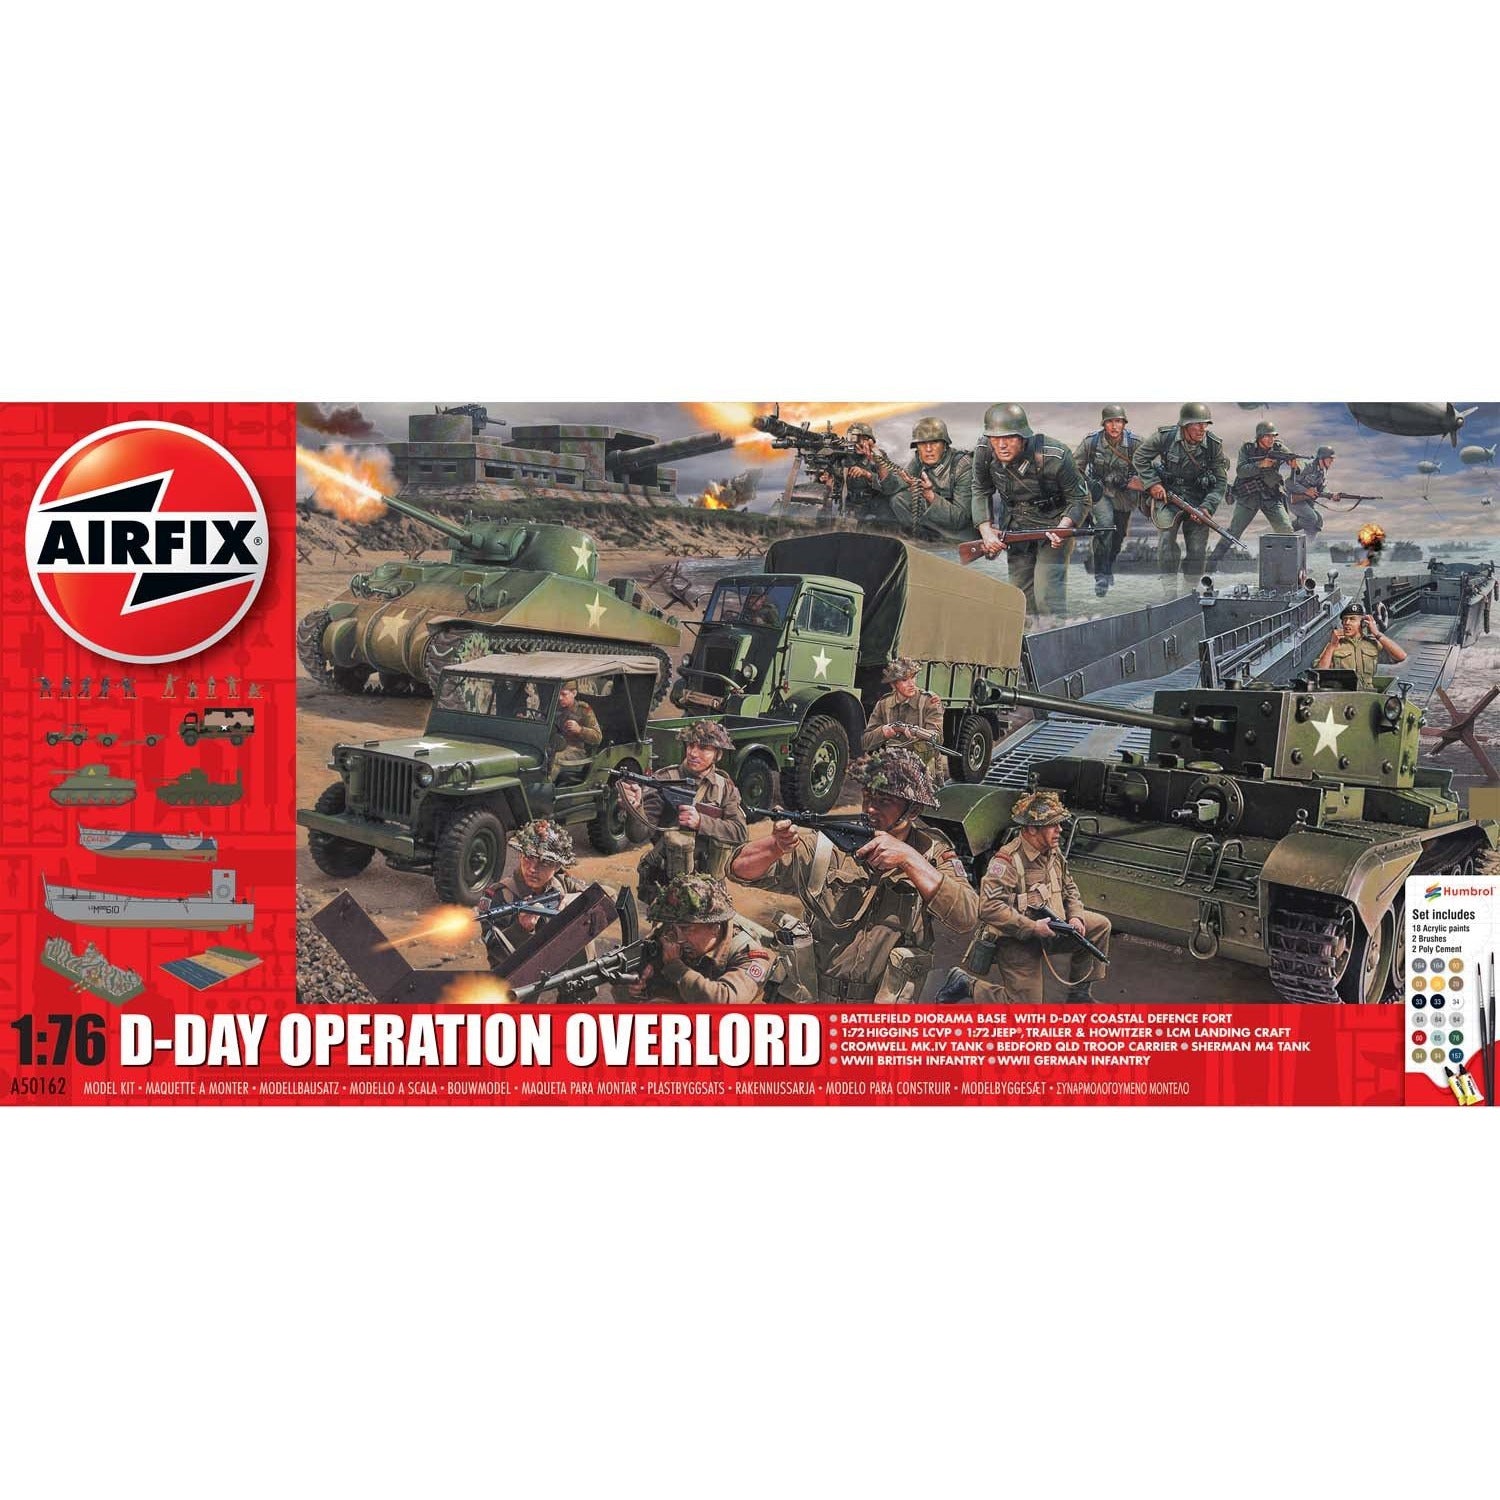 75th Anniversary D-Day Operation Overlord Diorama 1/76 Diorama Model Kit #A50162A by Airfix